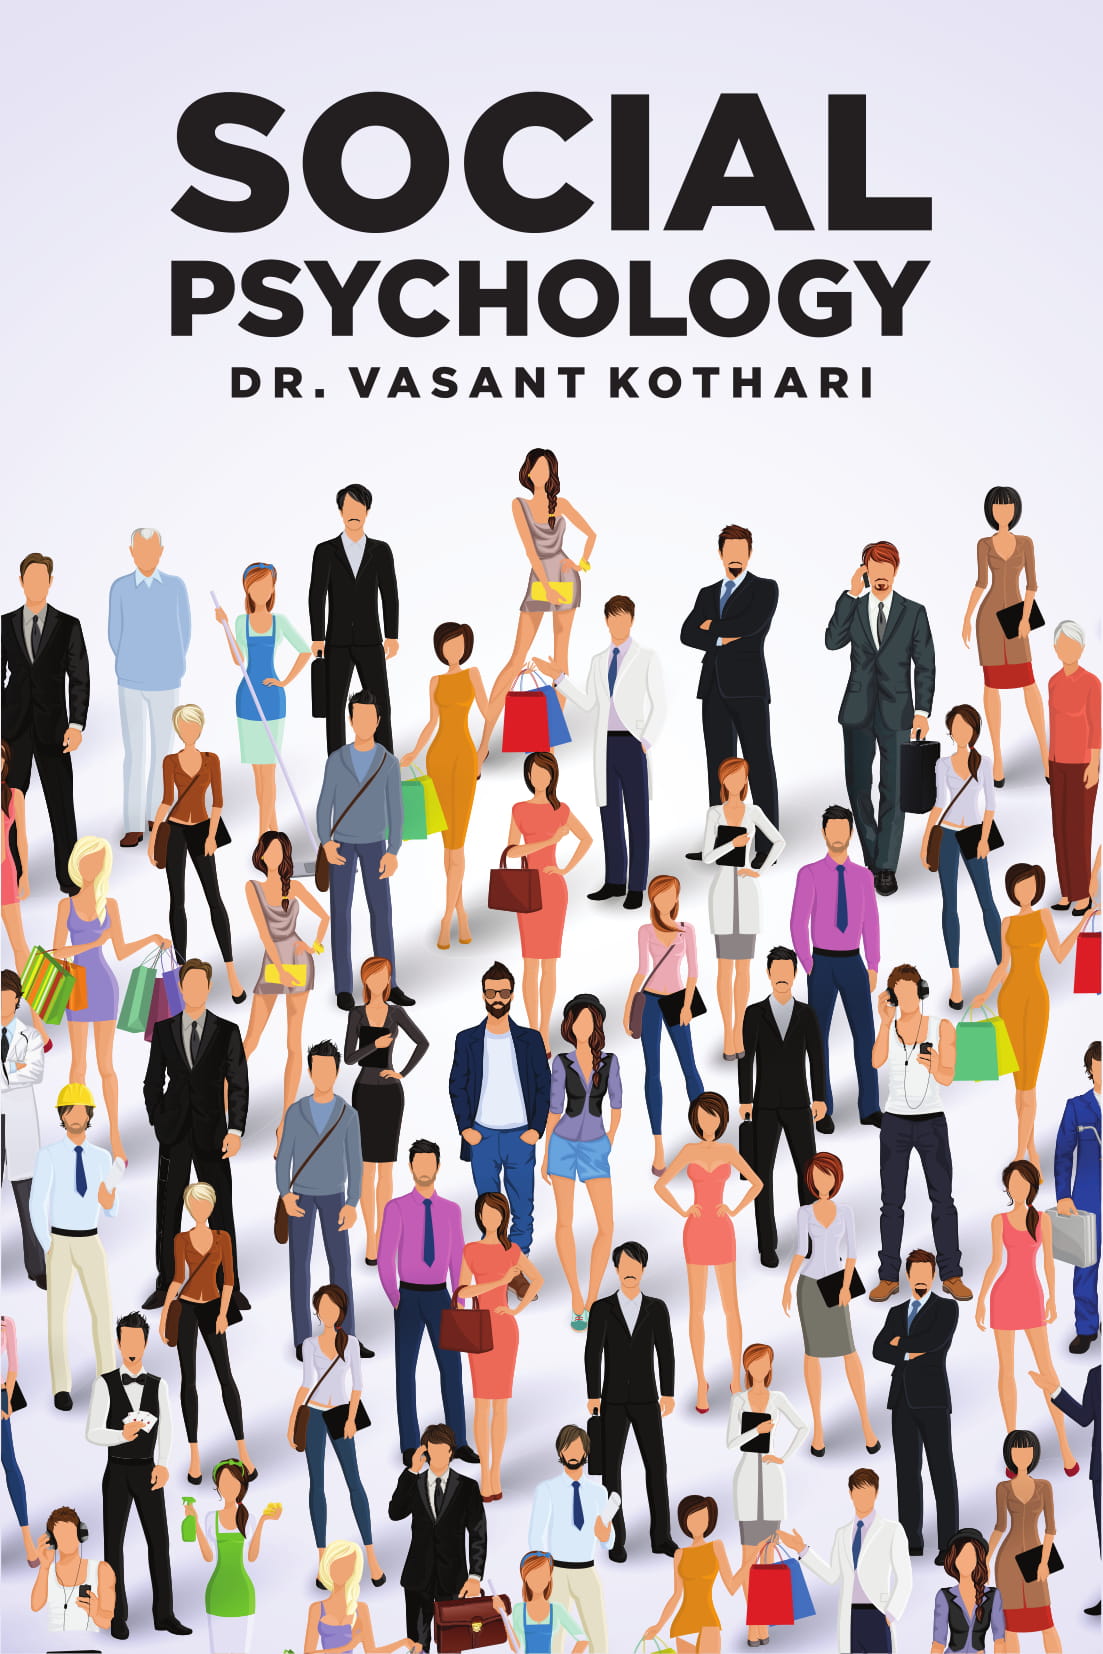 research topics related to social psychology